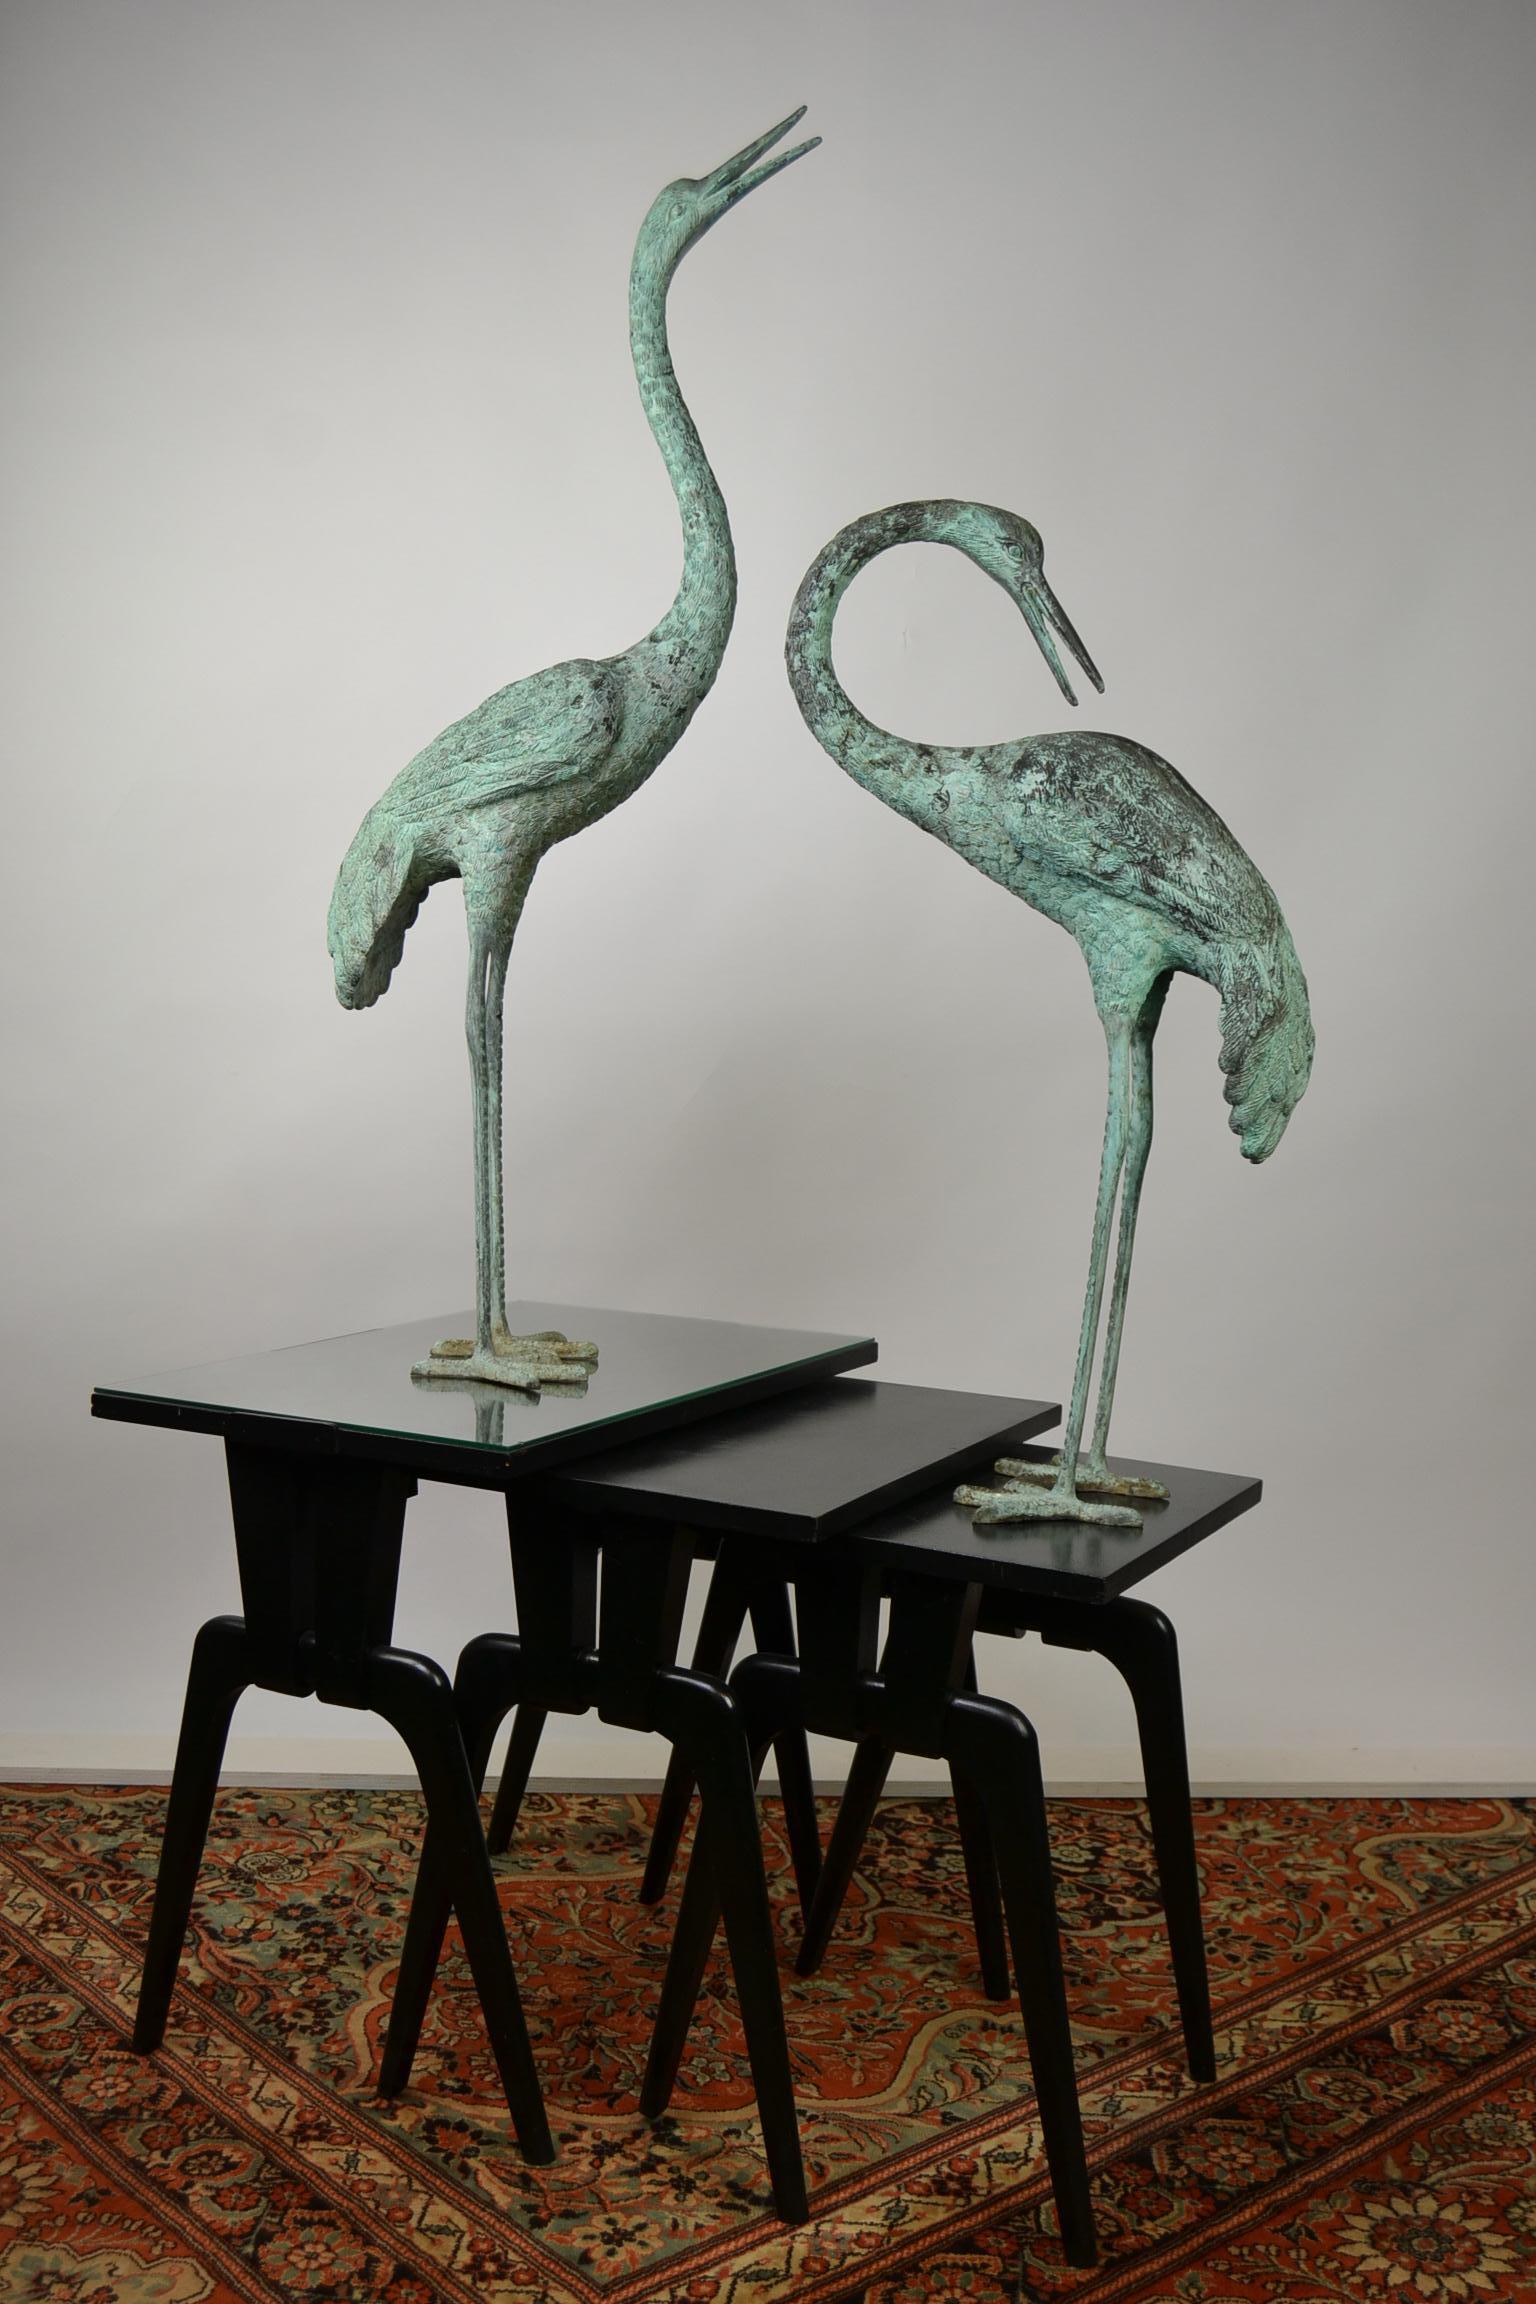 Stylish large vintage Set of two green patinated bronze crane bird statues.
You can use them inside or outside in your garden.
Interior object - Interior accent or garden ornament.
Detailed bird sculptures - bird statues with lovely